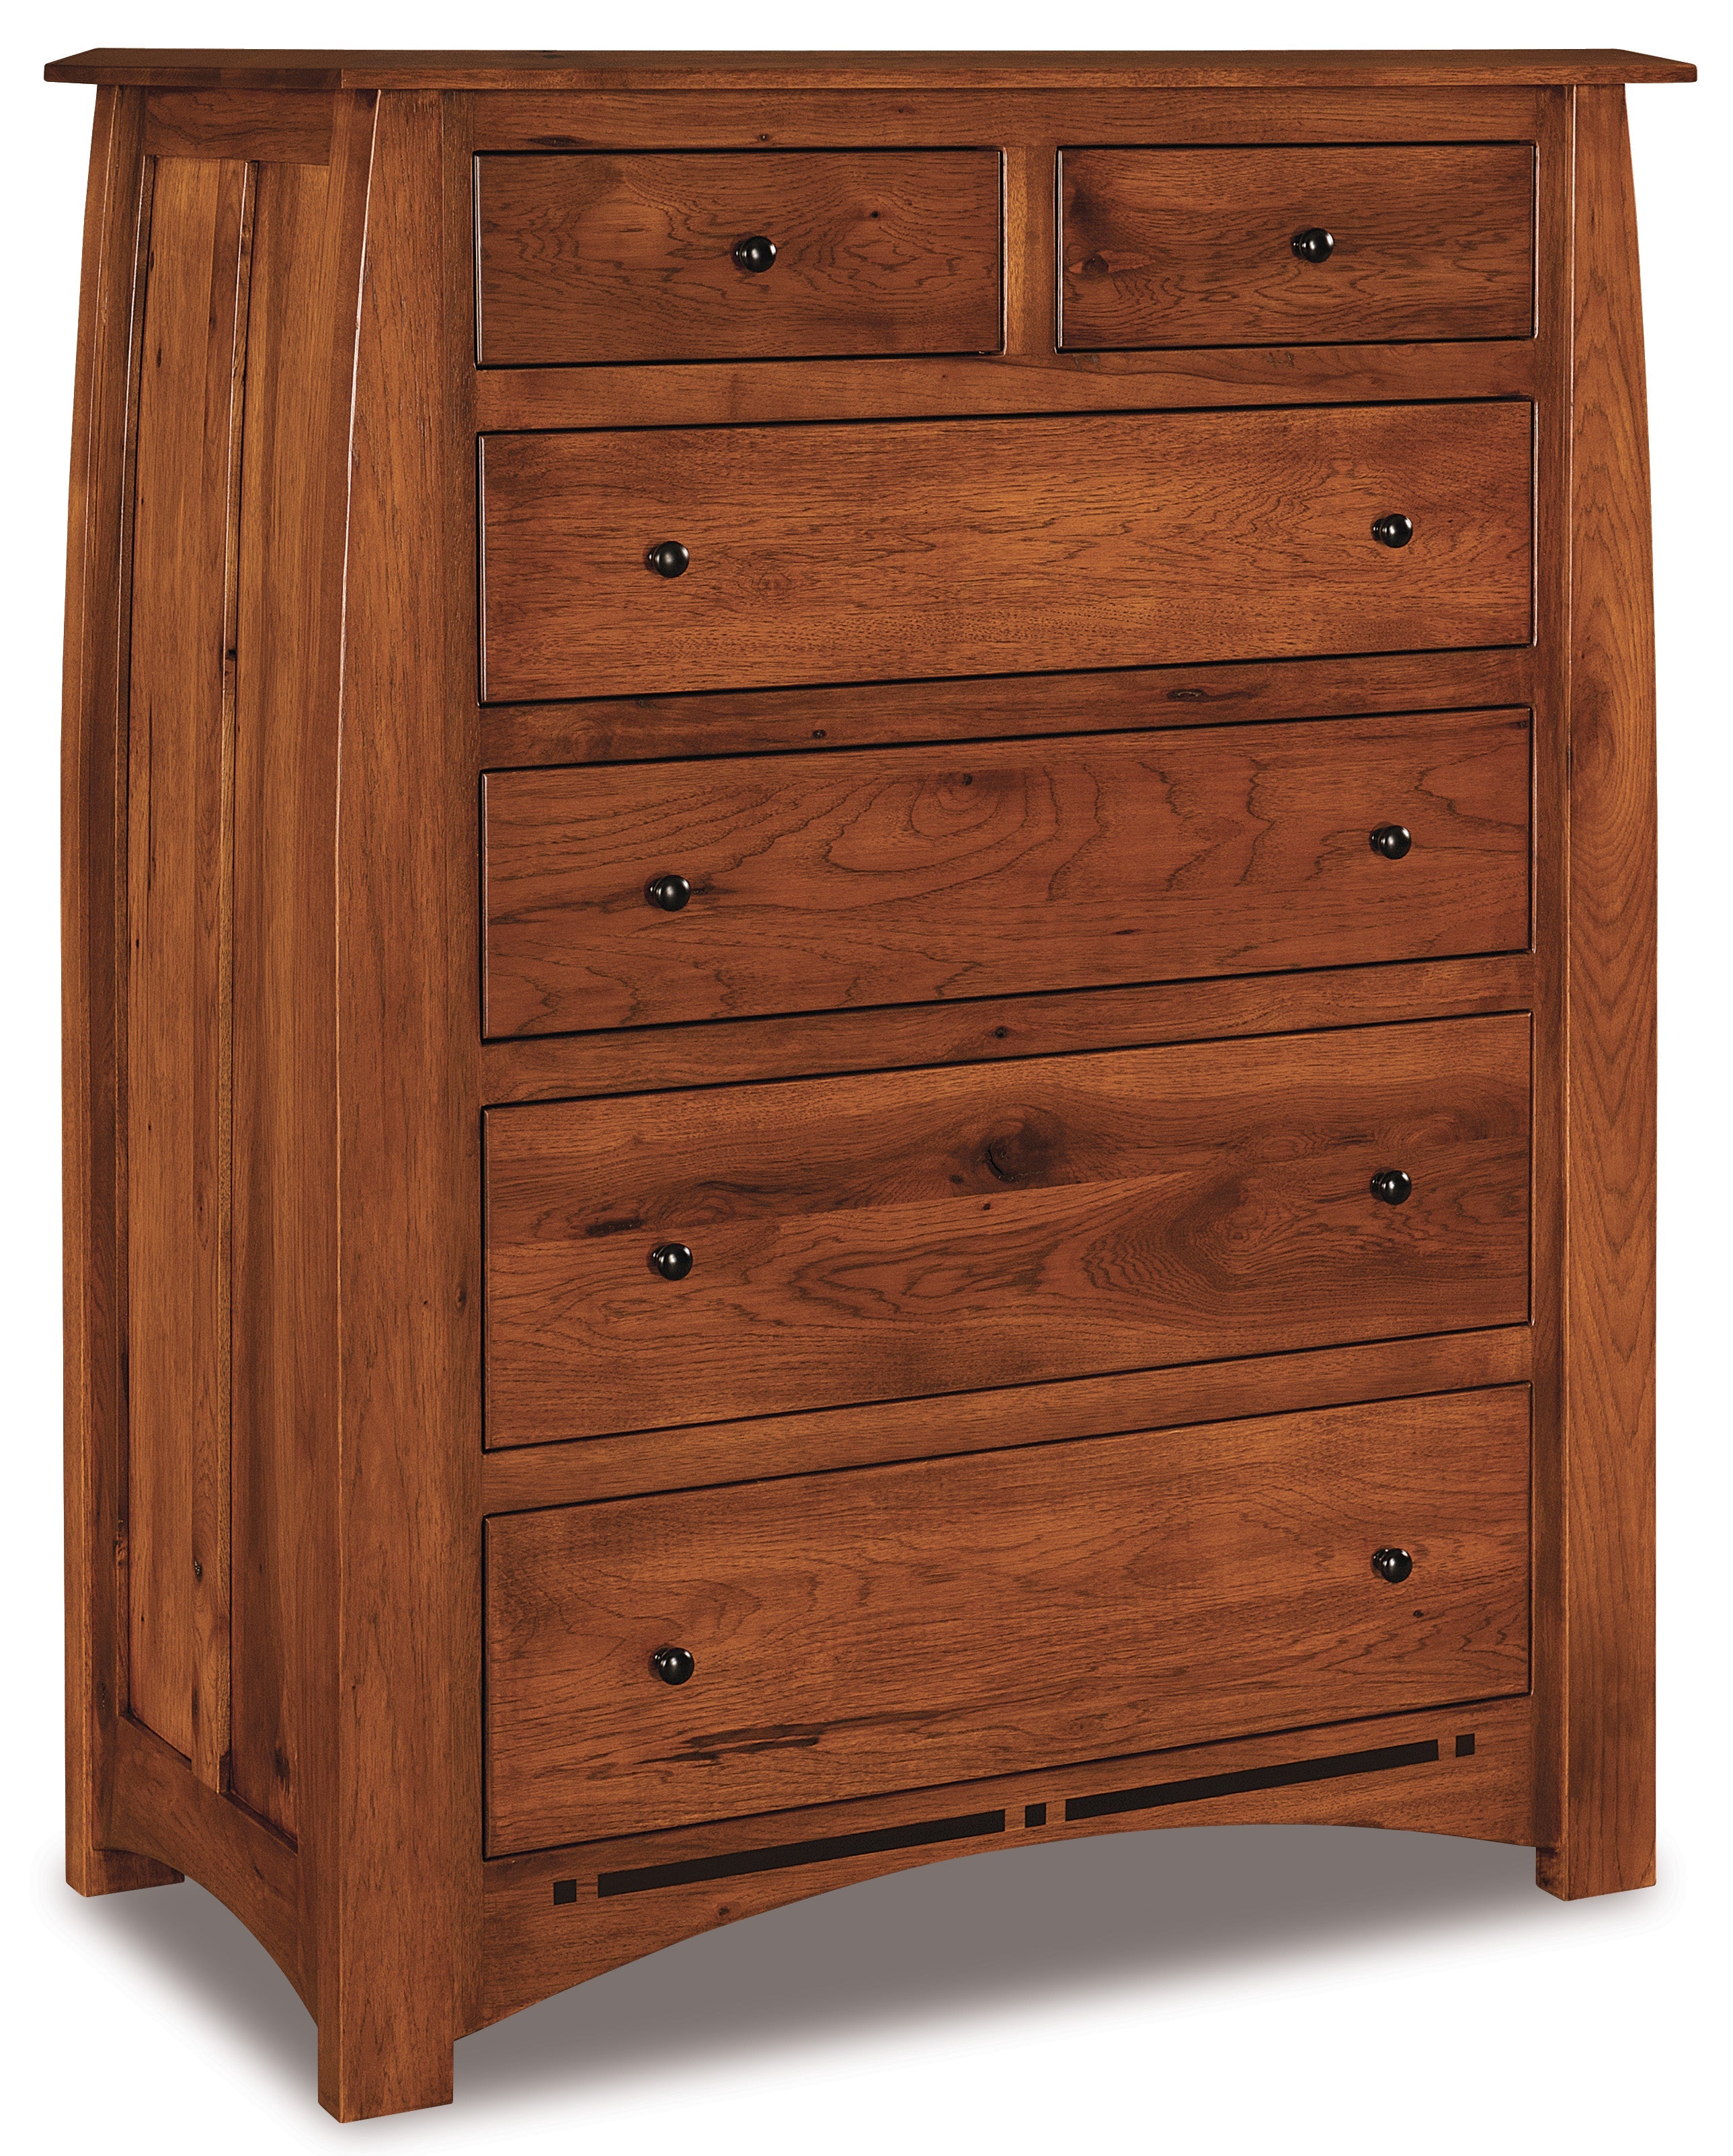 Amish Boulder Creek Chest of Drawers